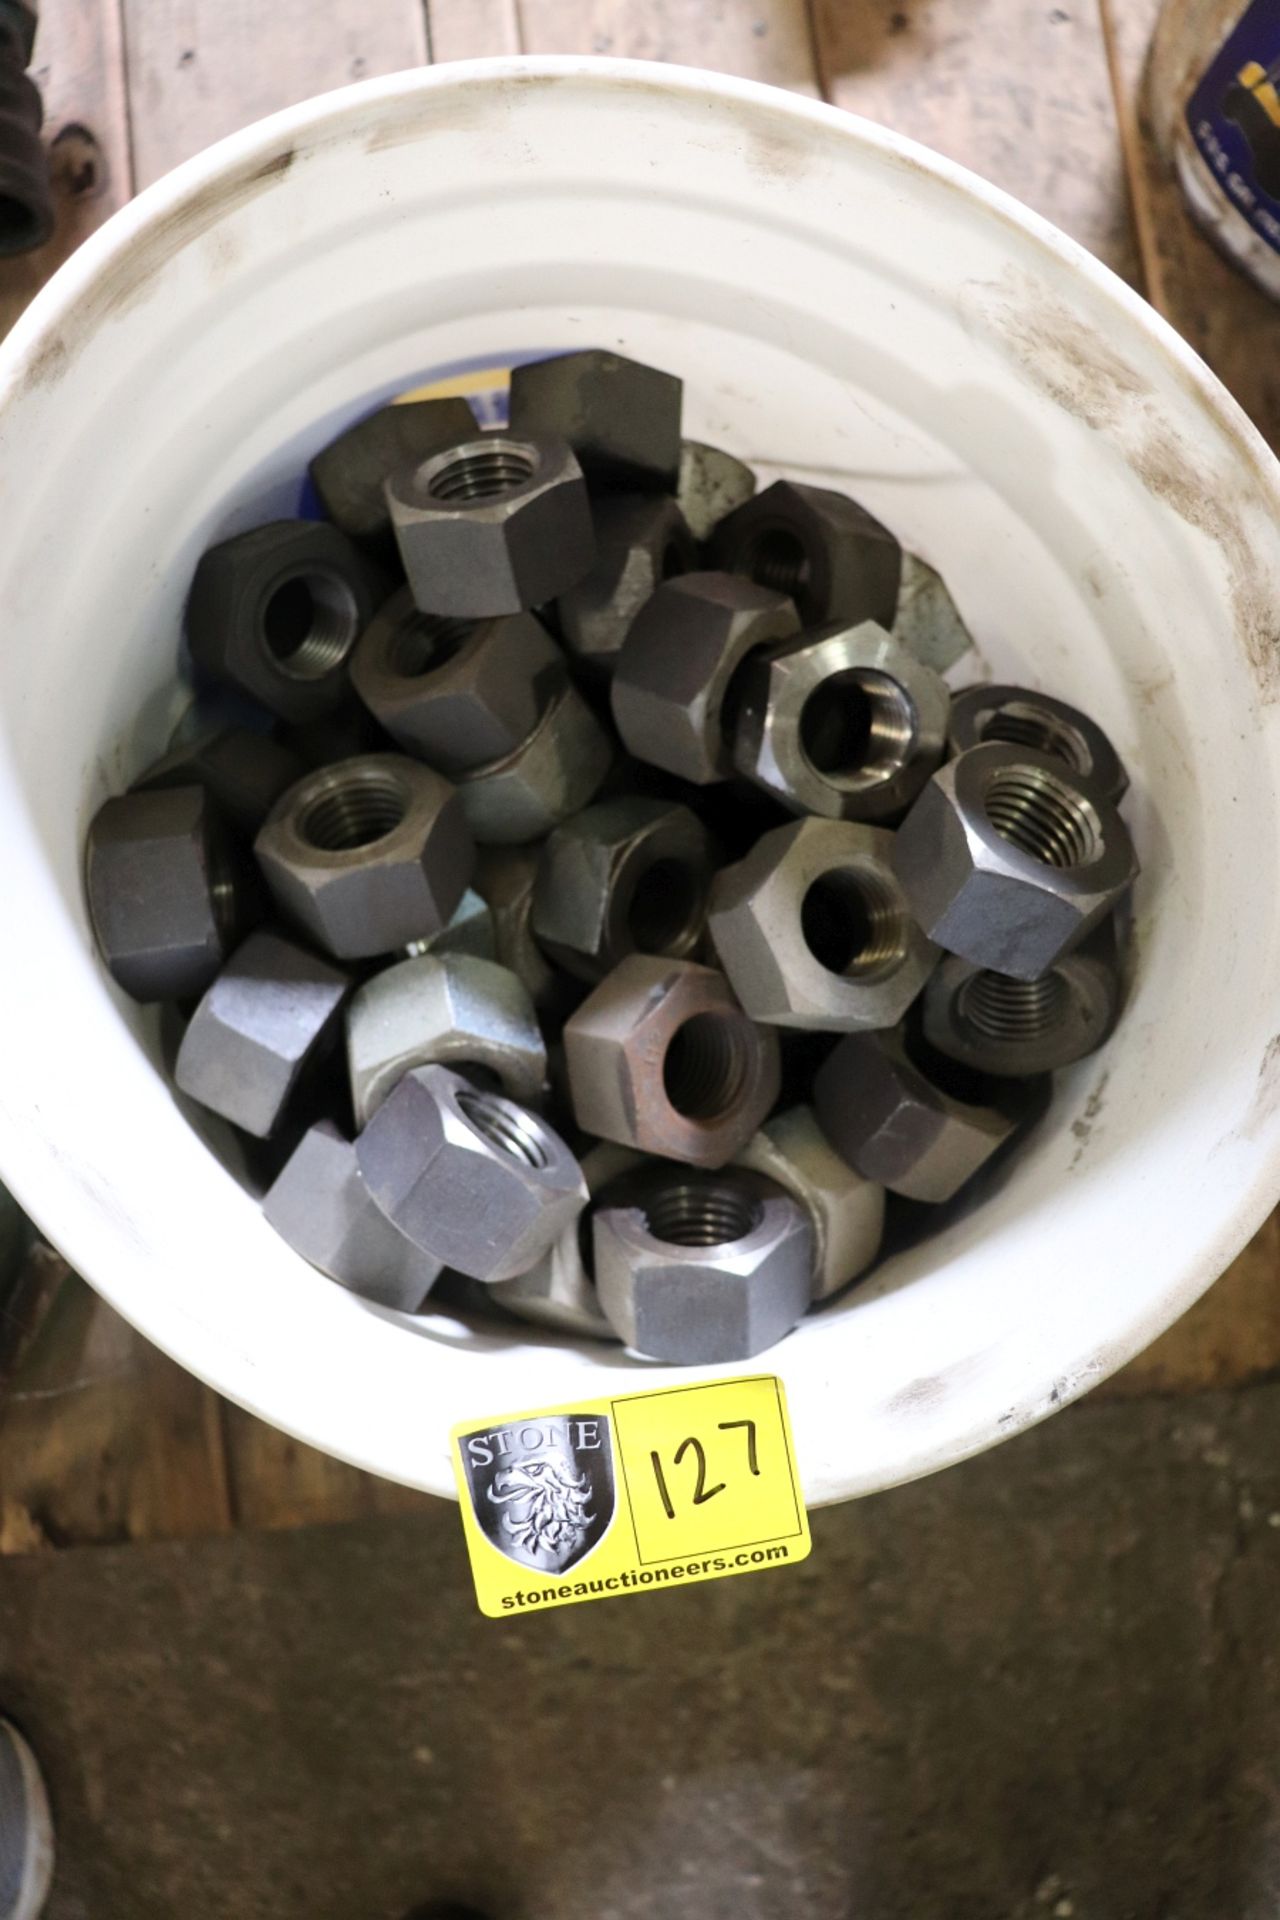 Lot of Hex nuts, 1-1/4" UNC